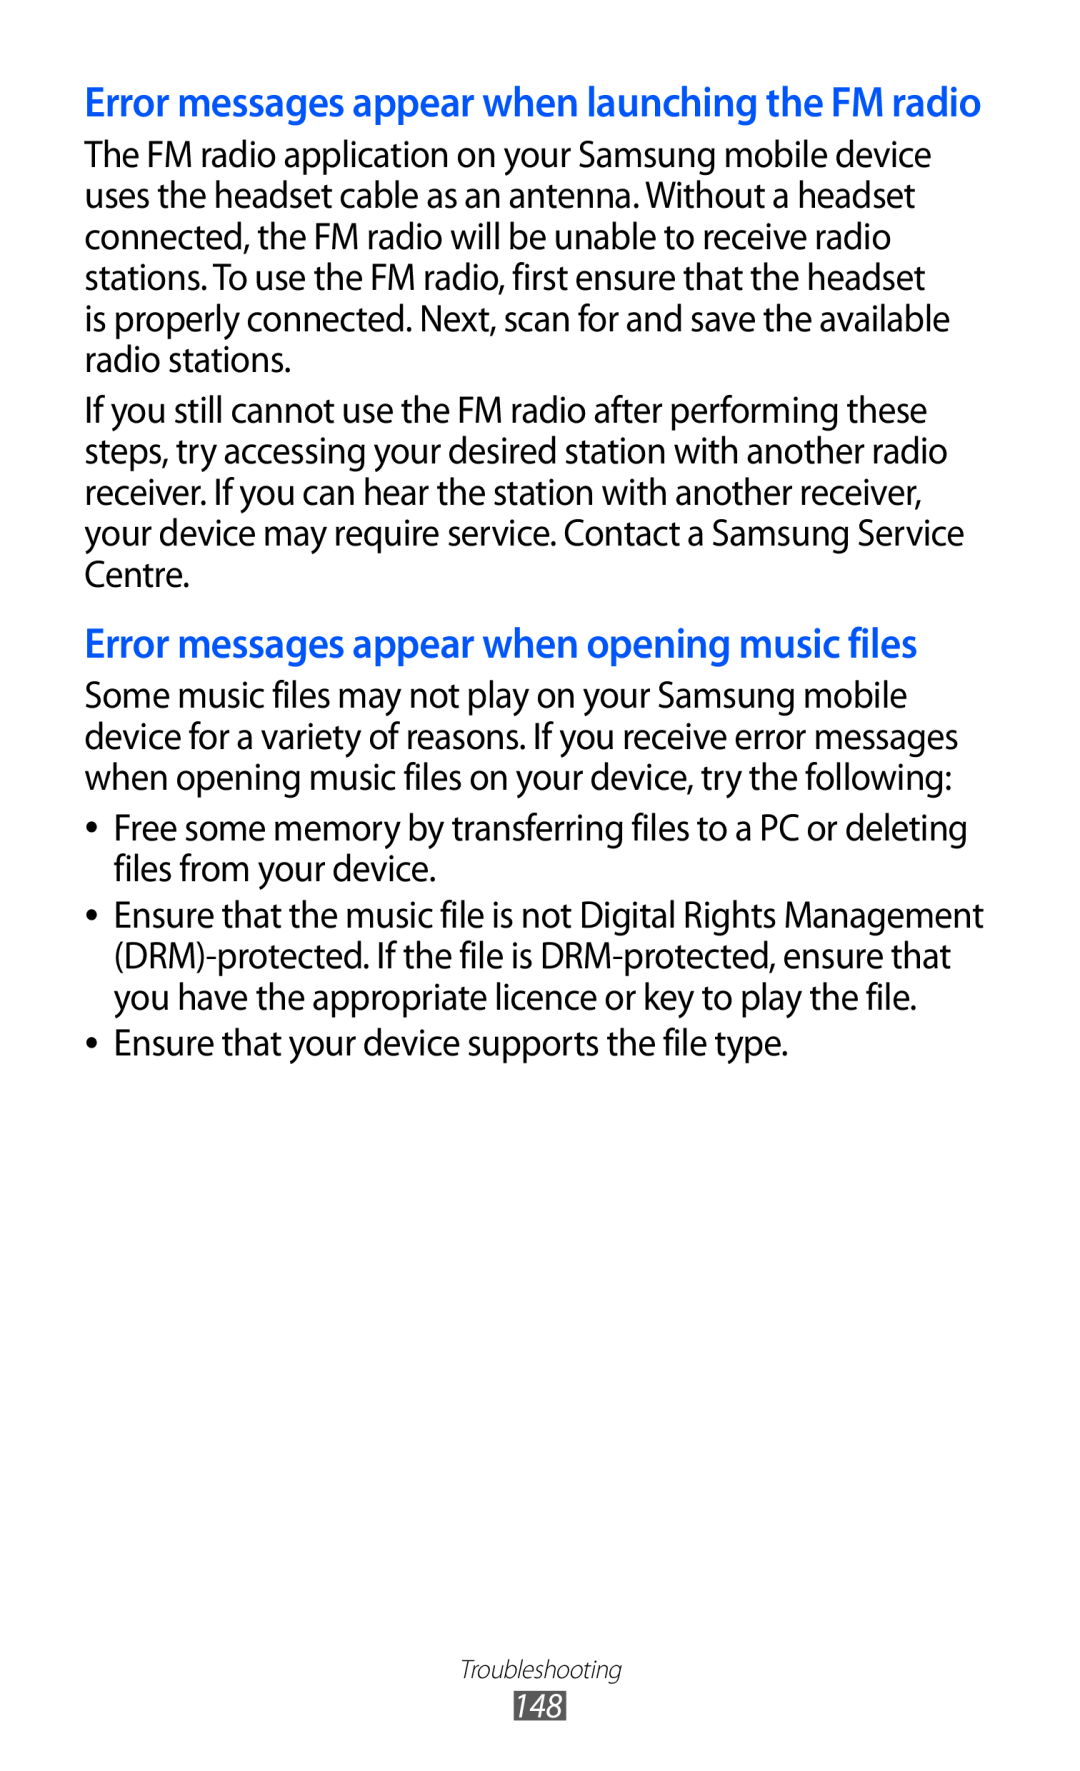 Samsung GT-I9070RWAJED Error messages appear when opening music files, Error messages appear when launching the FM radio 